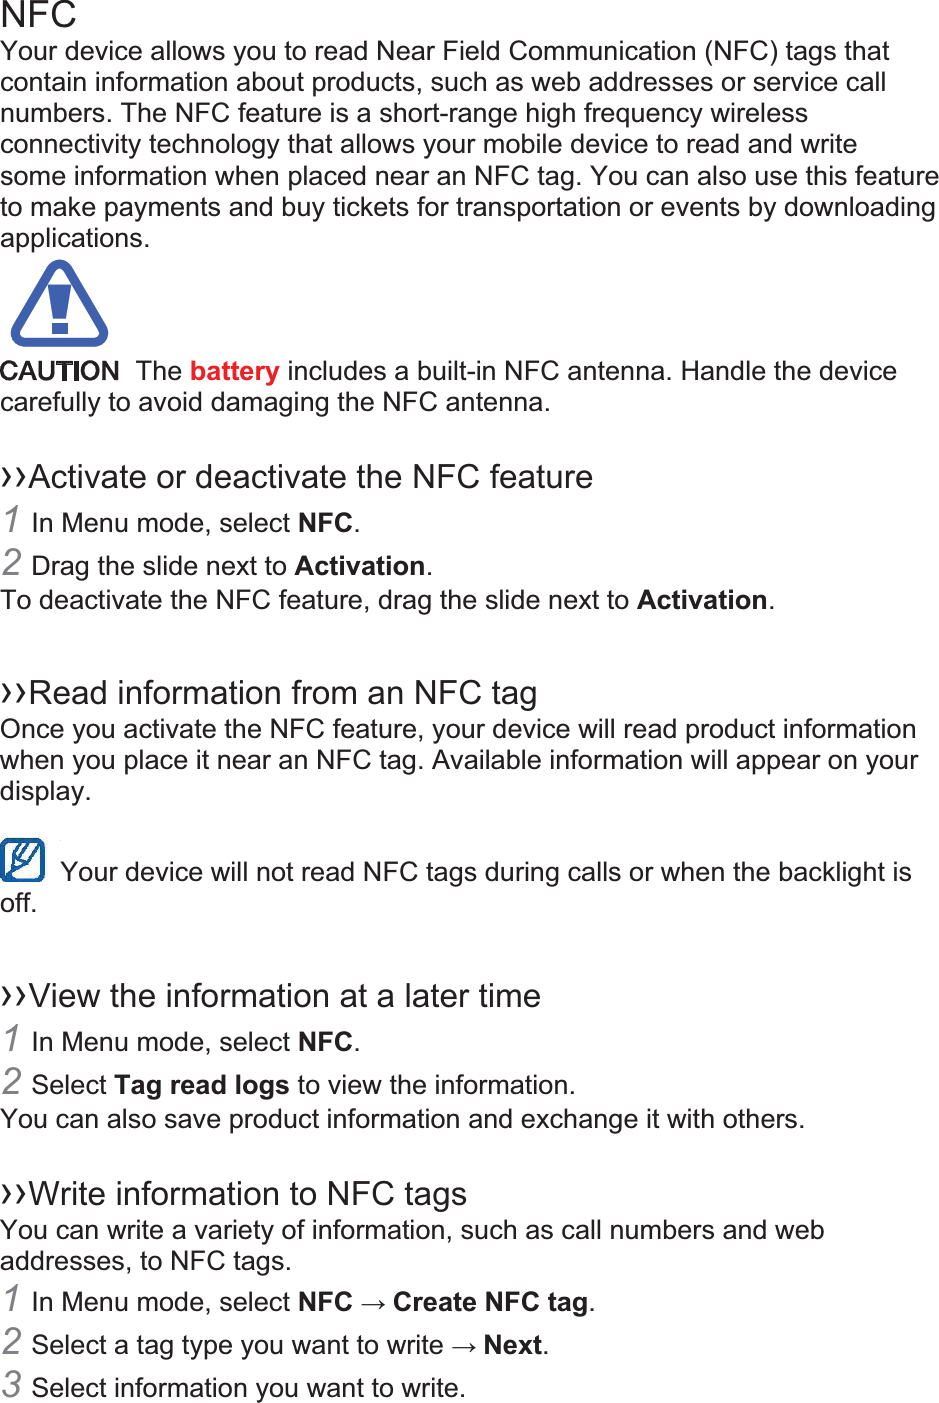 NFC Your device allows you to read Near Field Communication (NFC) tags that contain information about products, such as web addresses or service call numbers. The NFC feature is a short-range high frequency wireless connectivity technology that allows your mobile device to read and write some information when placed near an NFC tag. You can also use this feature to make payments and buy tickets for transportation or events by downloading applications.   The battery includes a built-in NFC antenna. Handle the device carefully to avoid damaging the NFC antenna.  ››Activate or deactivate the NFC feature 1In Menu mode, select NFC. 2Drag the slide next to Activation. To deactivate the NFC feature, drag the slide next to Activation.  ››Read information from an NFC tag Once you activate the NFC feature, your device will read product information when you place it near an NFC tag. Available information will appear on your display.  Your device will not read NFC tags during calls or when the backlight is   off.  ››View the information at a later time 1In Menu mode, select NFC. 2Select Tag read logs to view the information. You can also save product information and exchange it with others.  ››Write information to NFC tags   You can write a variety of information, such as call numbers and web addresses, to NFC tags. 1In Menu mode, select NFC  Create NFC tag. 2Select a tag type you want to write  Next. 3Select information you want to write. 